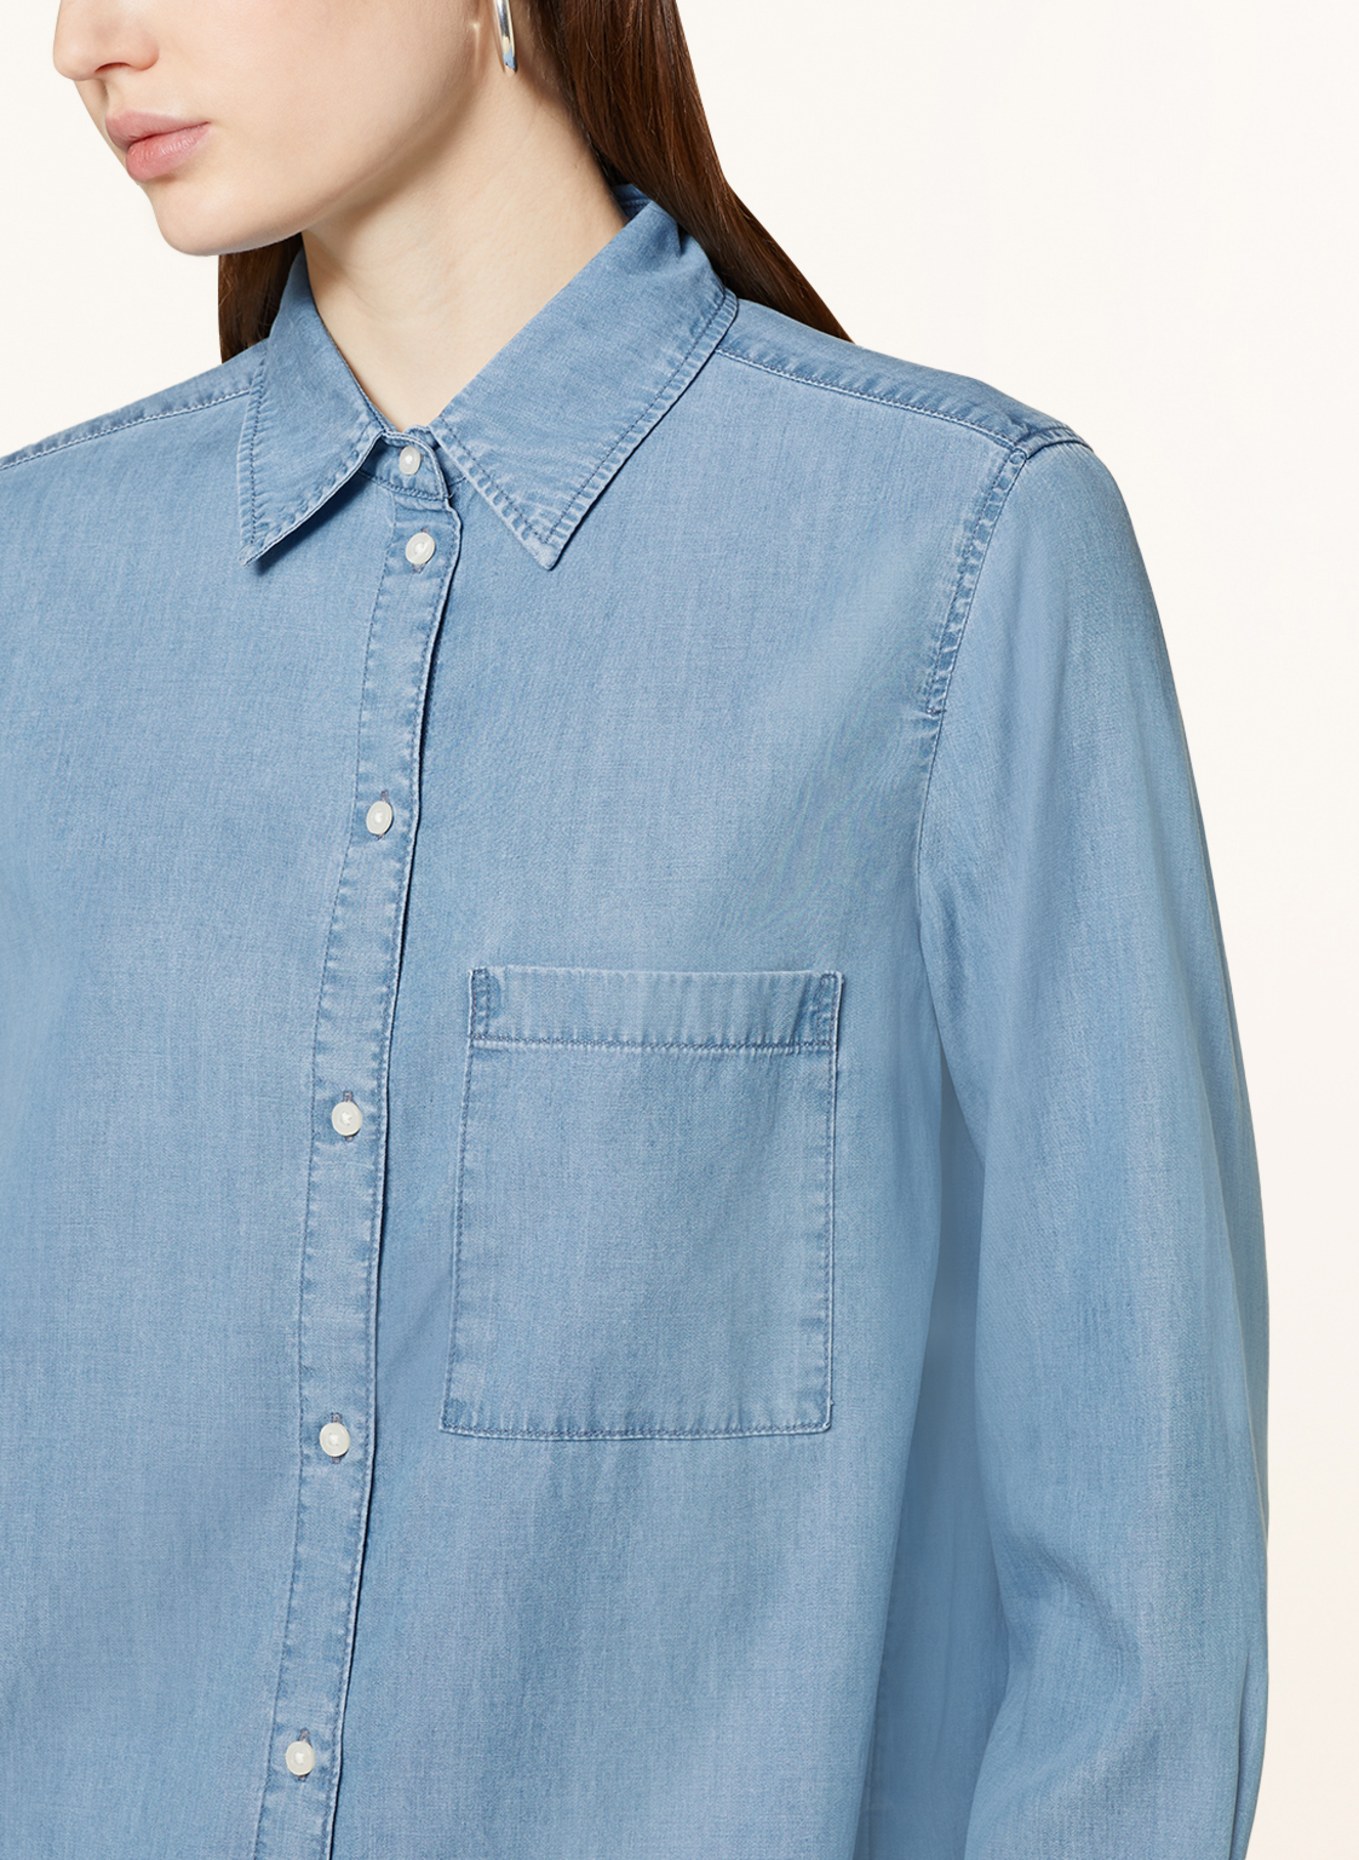 Marc O'Polo Shirt blouse in denim look, Color: LIGHT BLUE (Image 4)